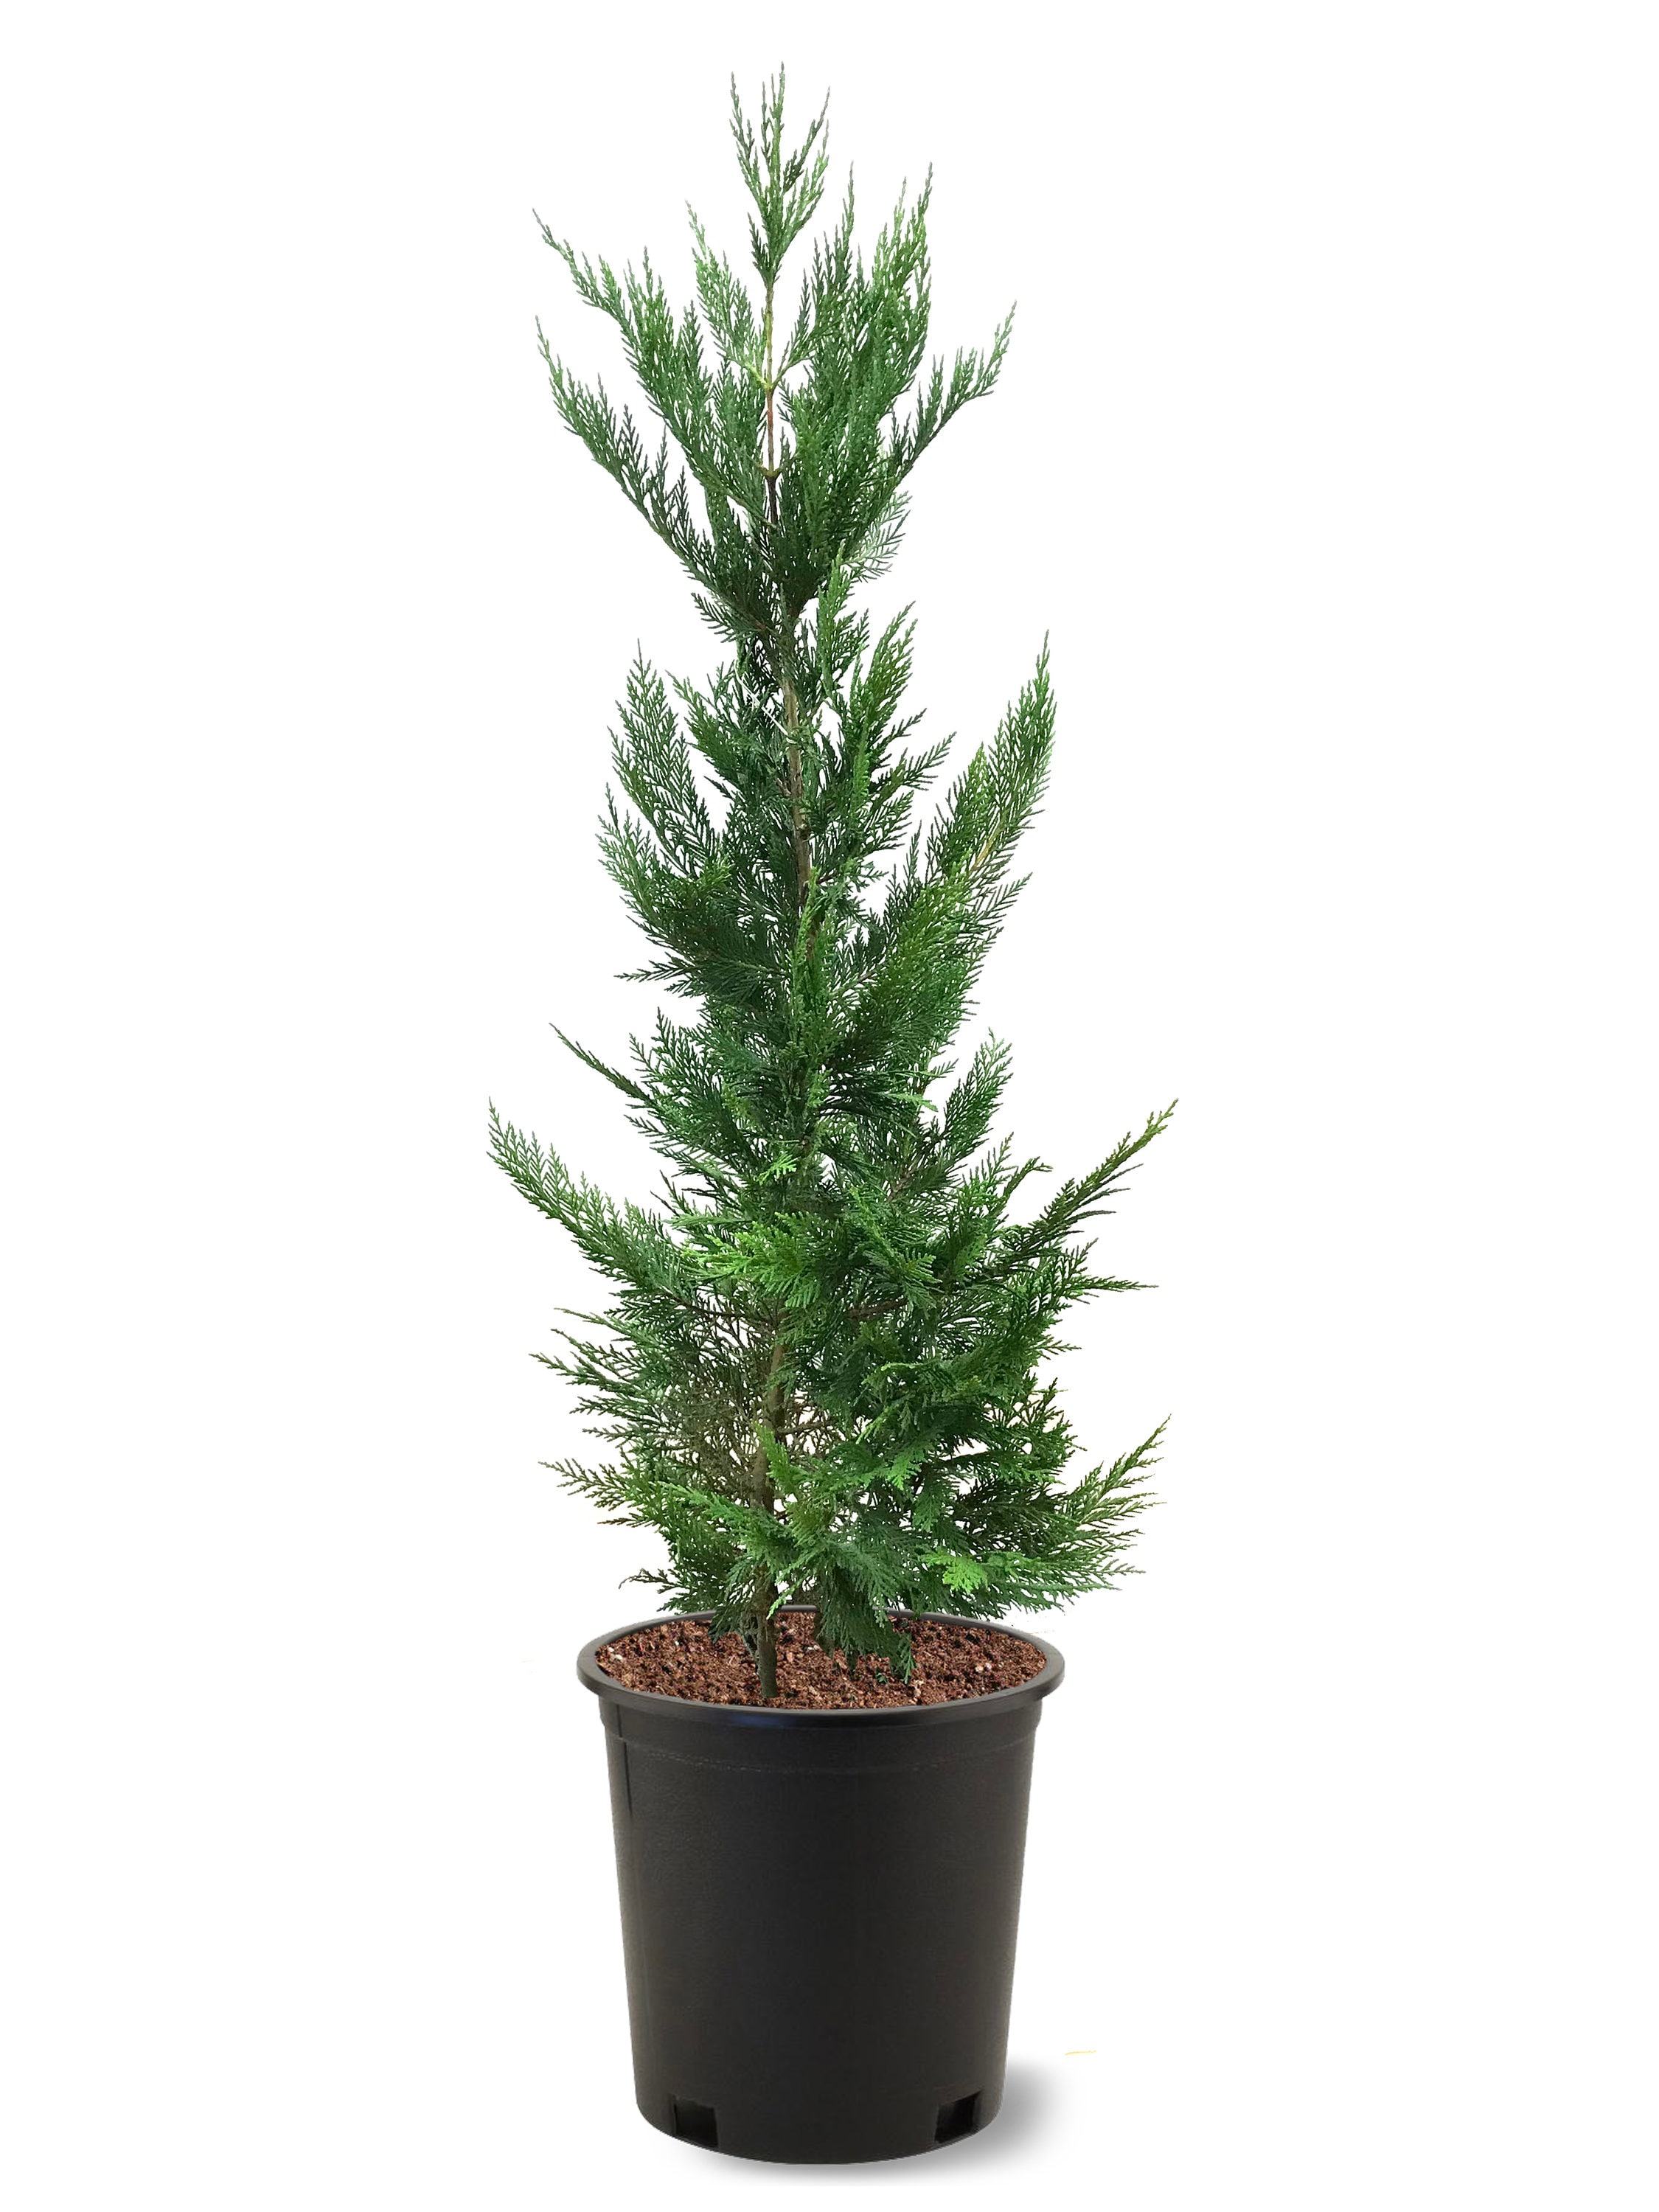 Image of Leyland cypress tree with Miracle-Gro Evergreen